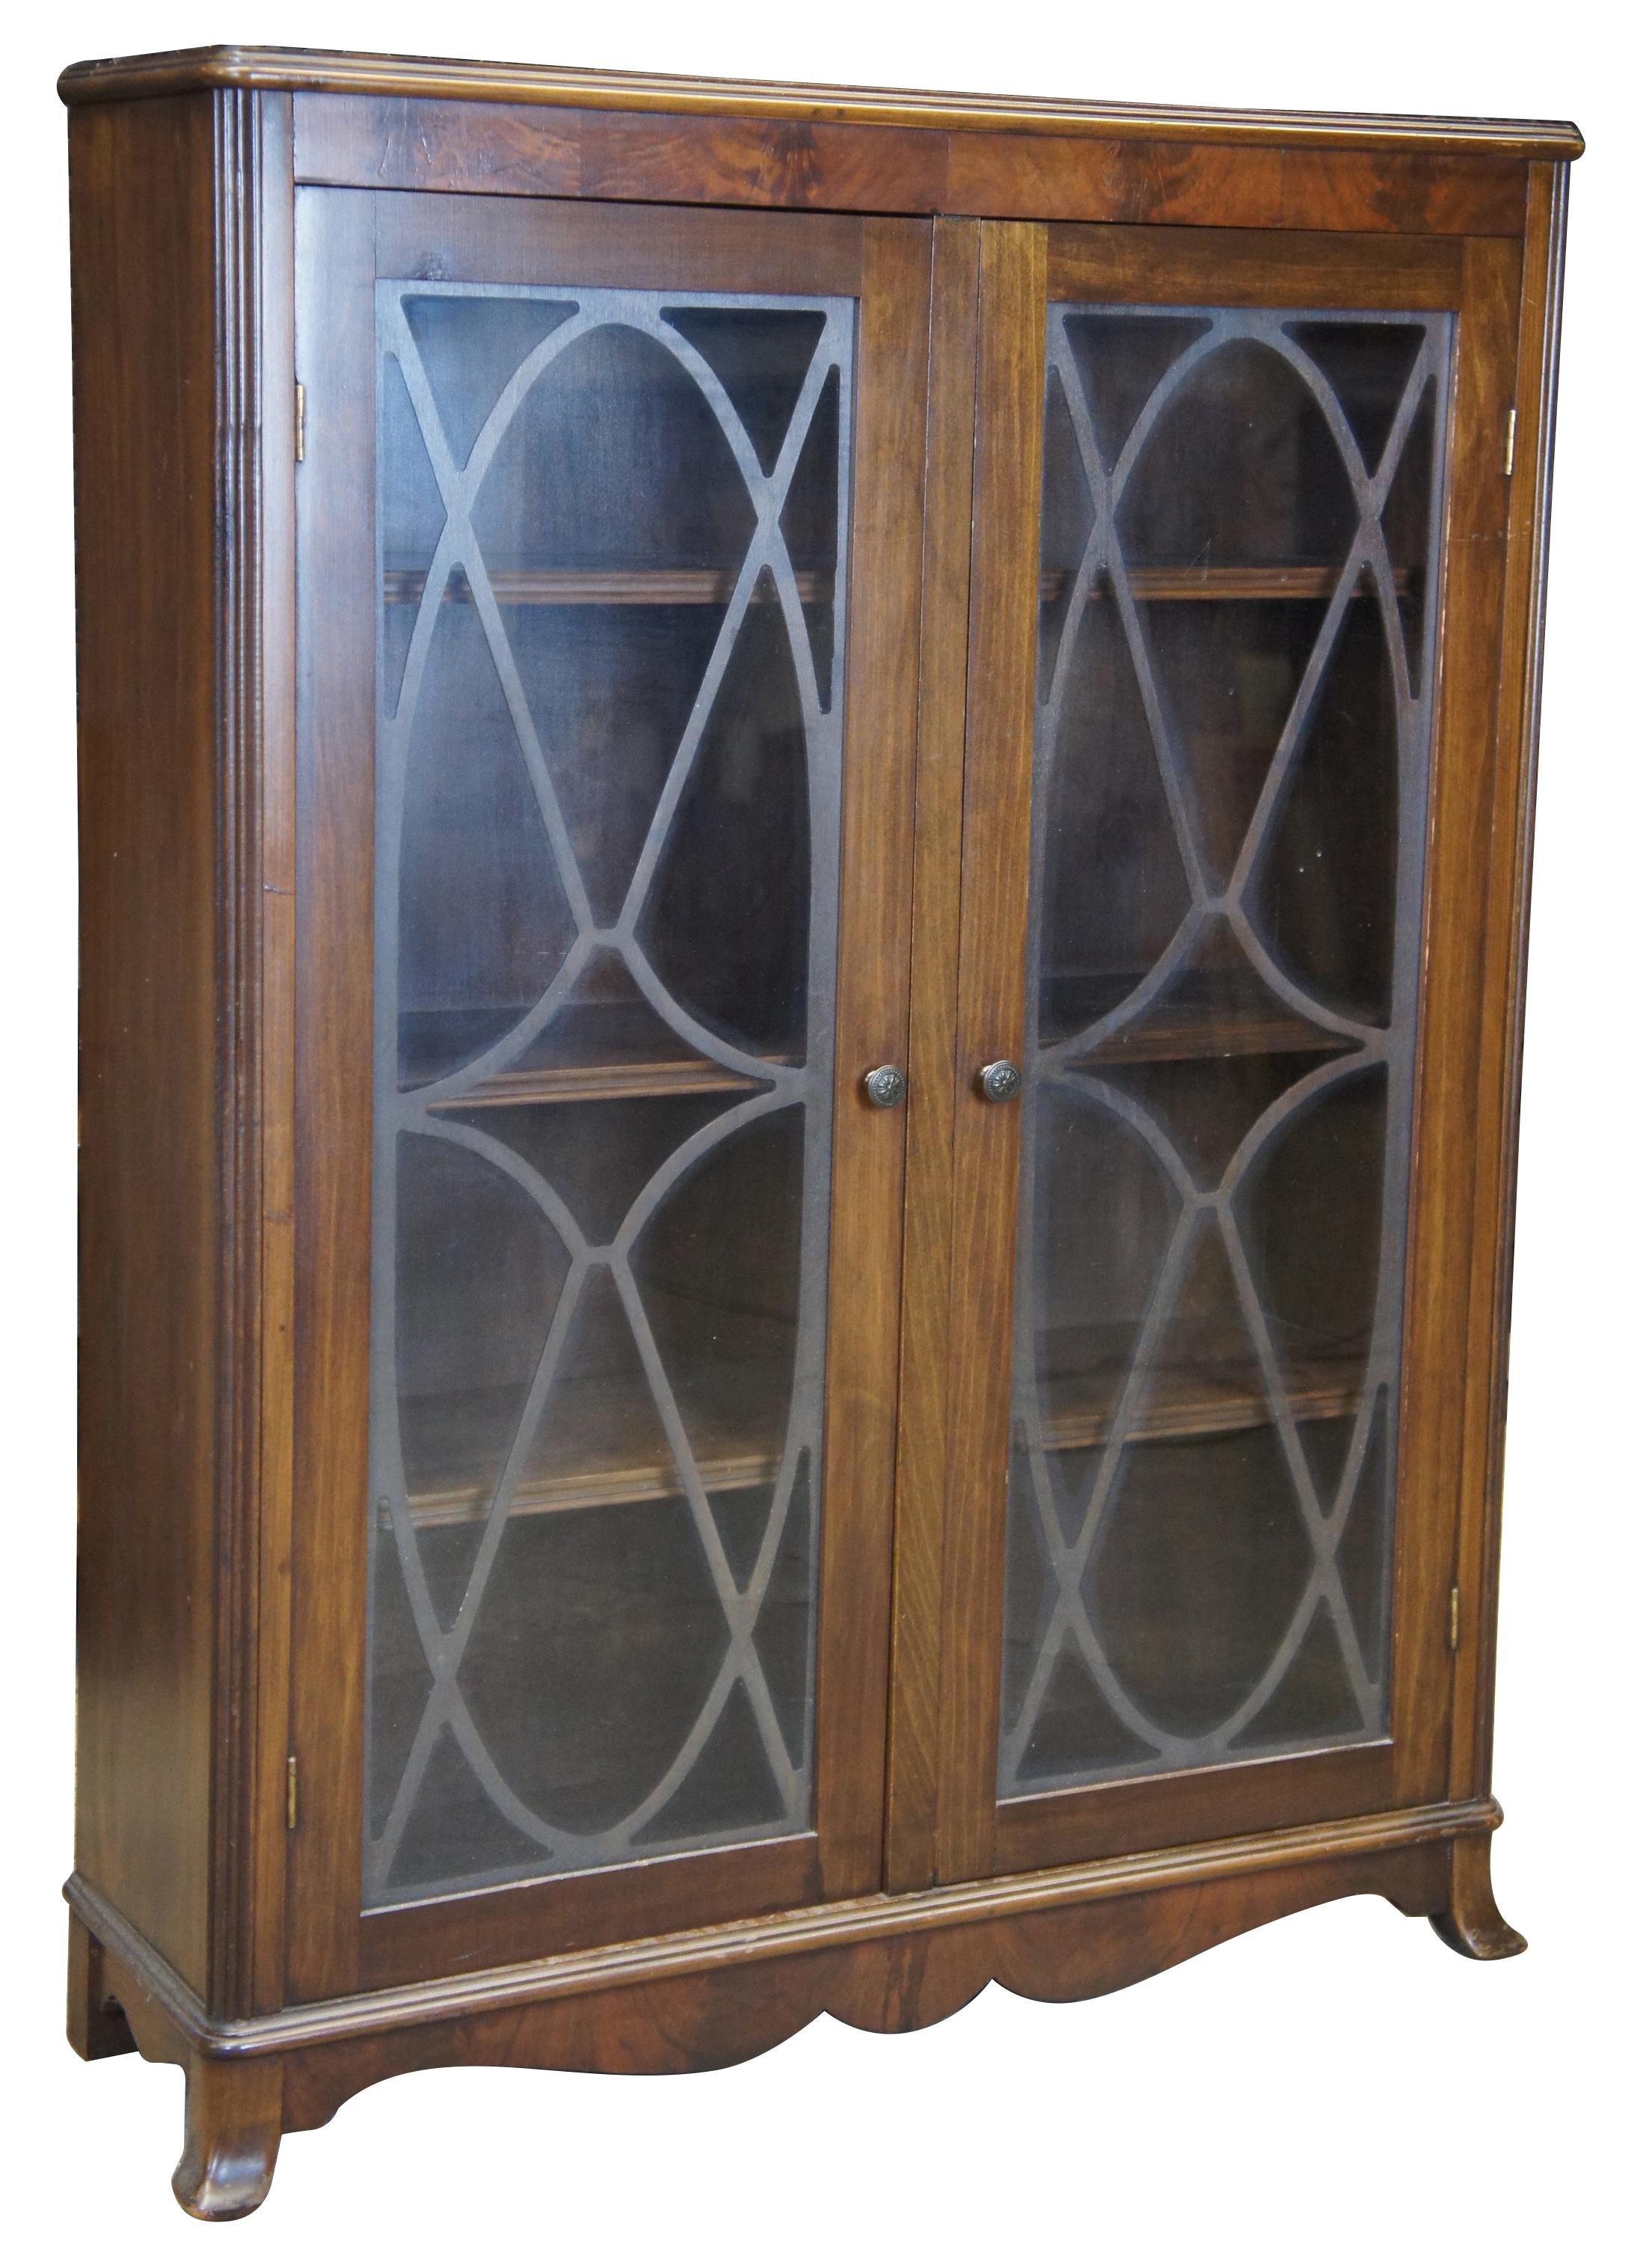 Georgian style walnut bookcase, circa 1930s. Features three fixed shelves behind two glass doors with fretwork. Includes carved lower apron and flared legs.
  